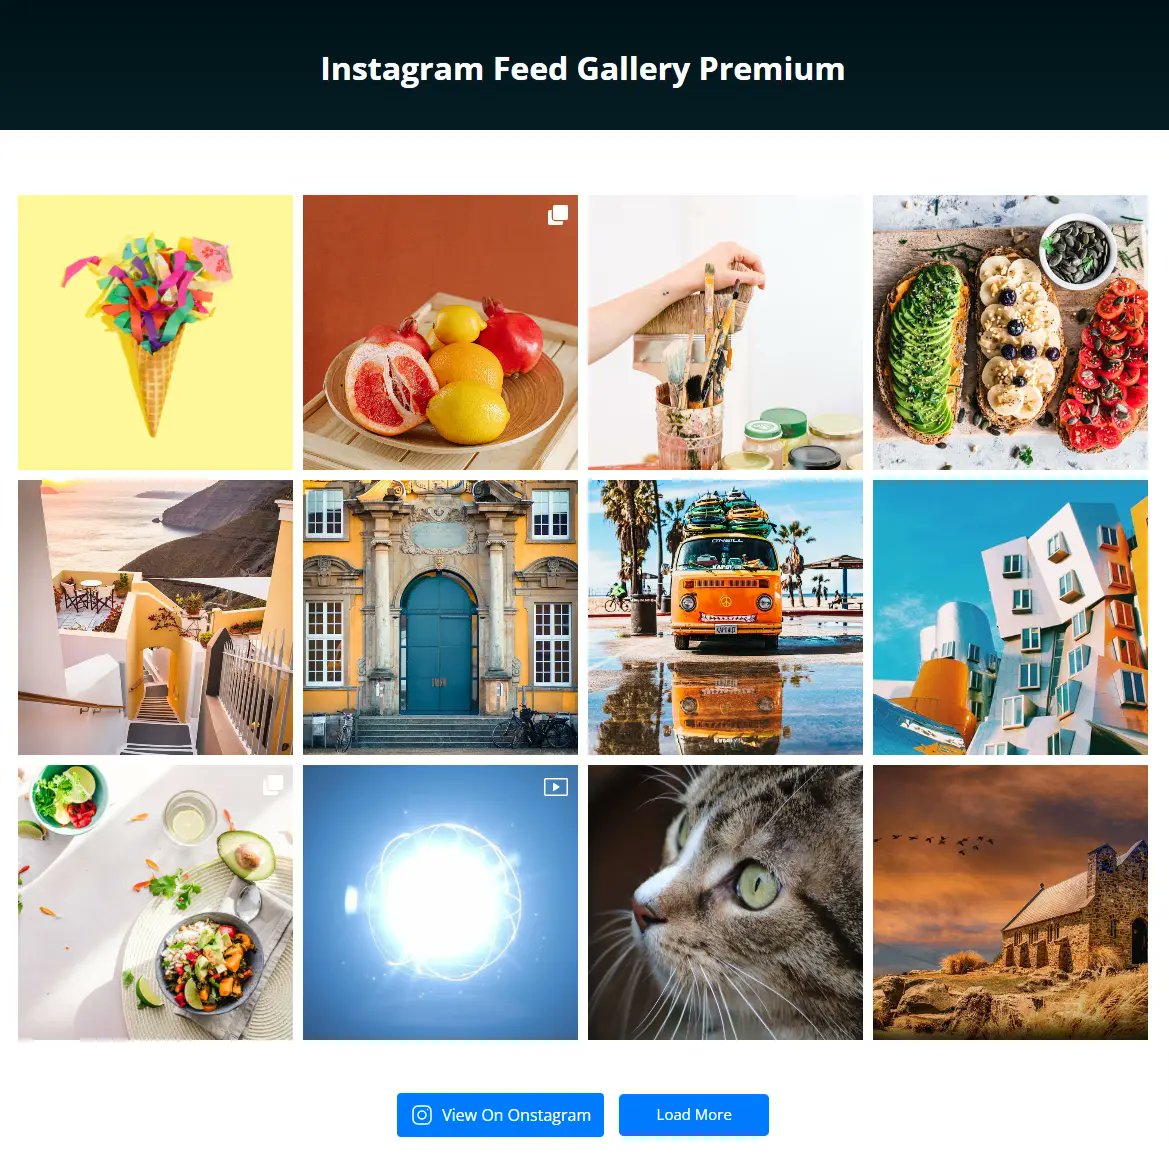 Show off your stunning Instagram feed on your WordPress site!

The Instagram Feed Gallery Premium Plugin lets you create a responsive & customizable gallery in seconds.  #instagram #wordpressplugin #engagement

Get Now At 25% OFF
bit.ly/3EgatRs